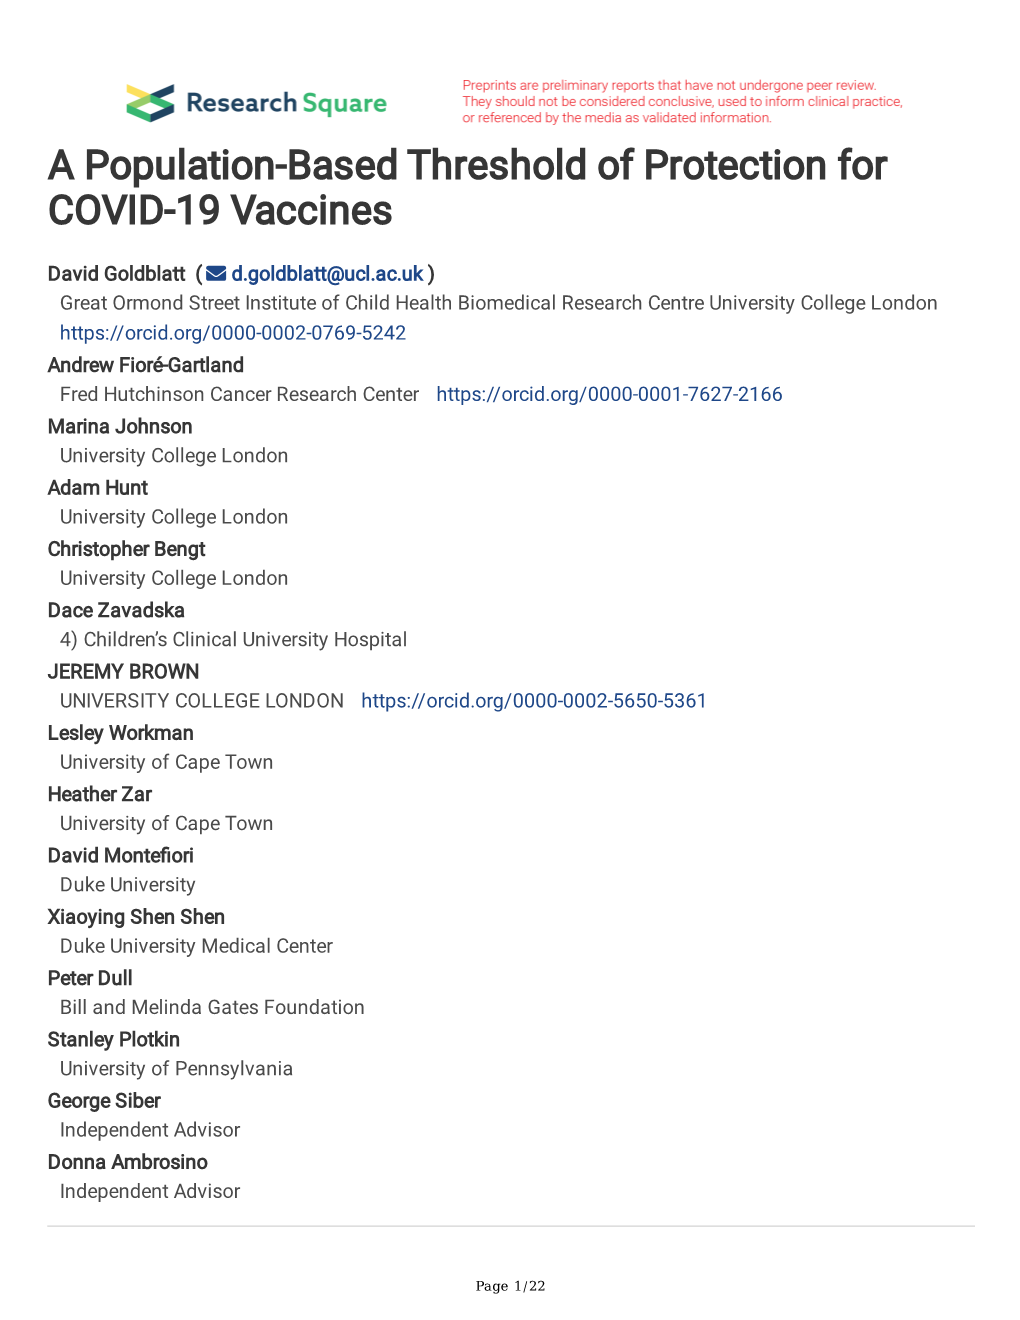 A Population-Based Threshold of Protection for COVID-19 Vaccines